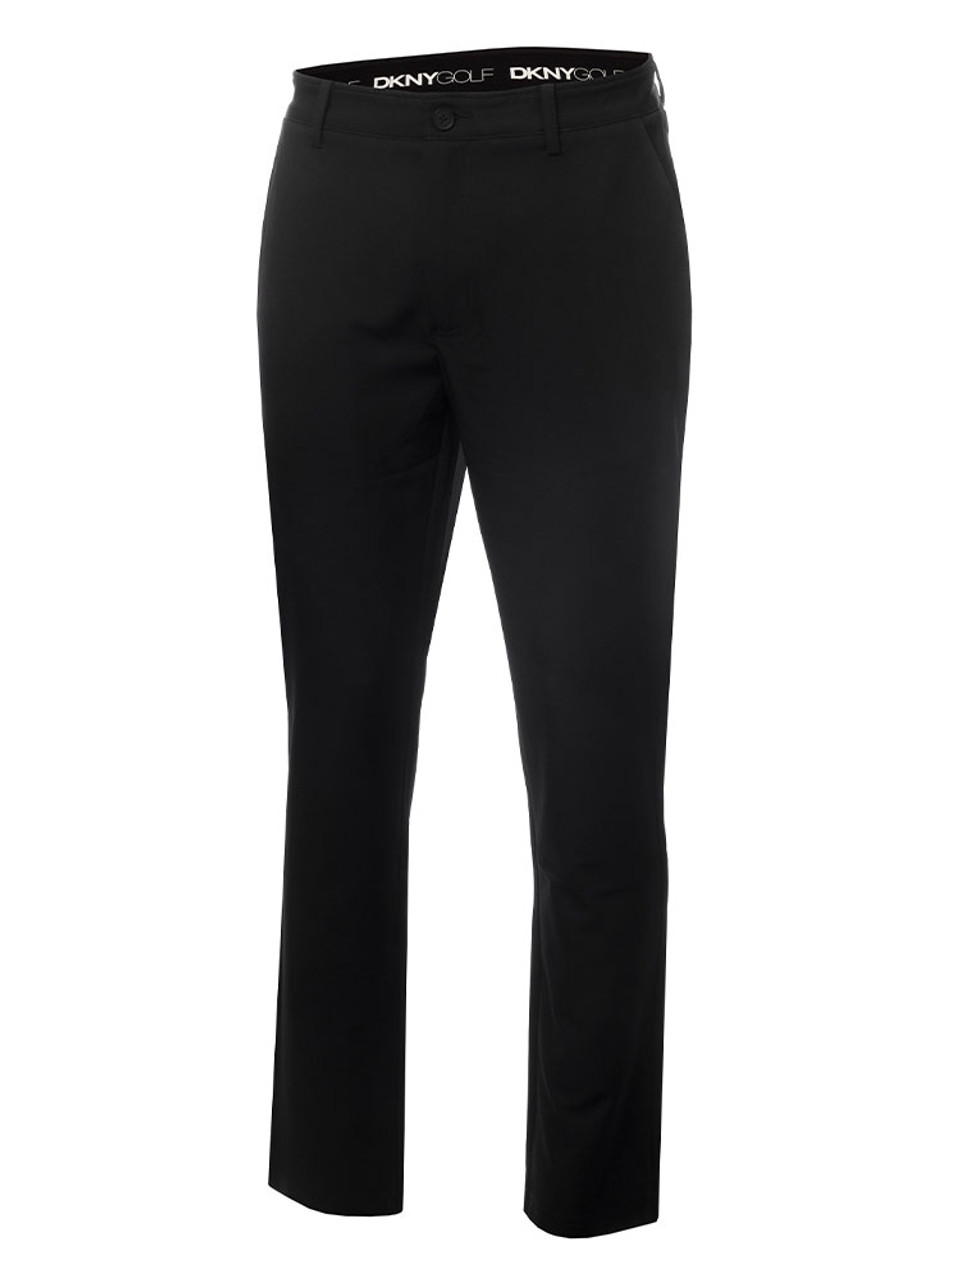 Buy DKNY Mens Clippers Lounge Pants Black